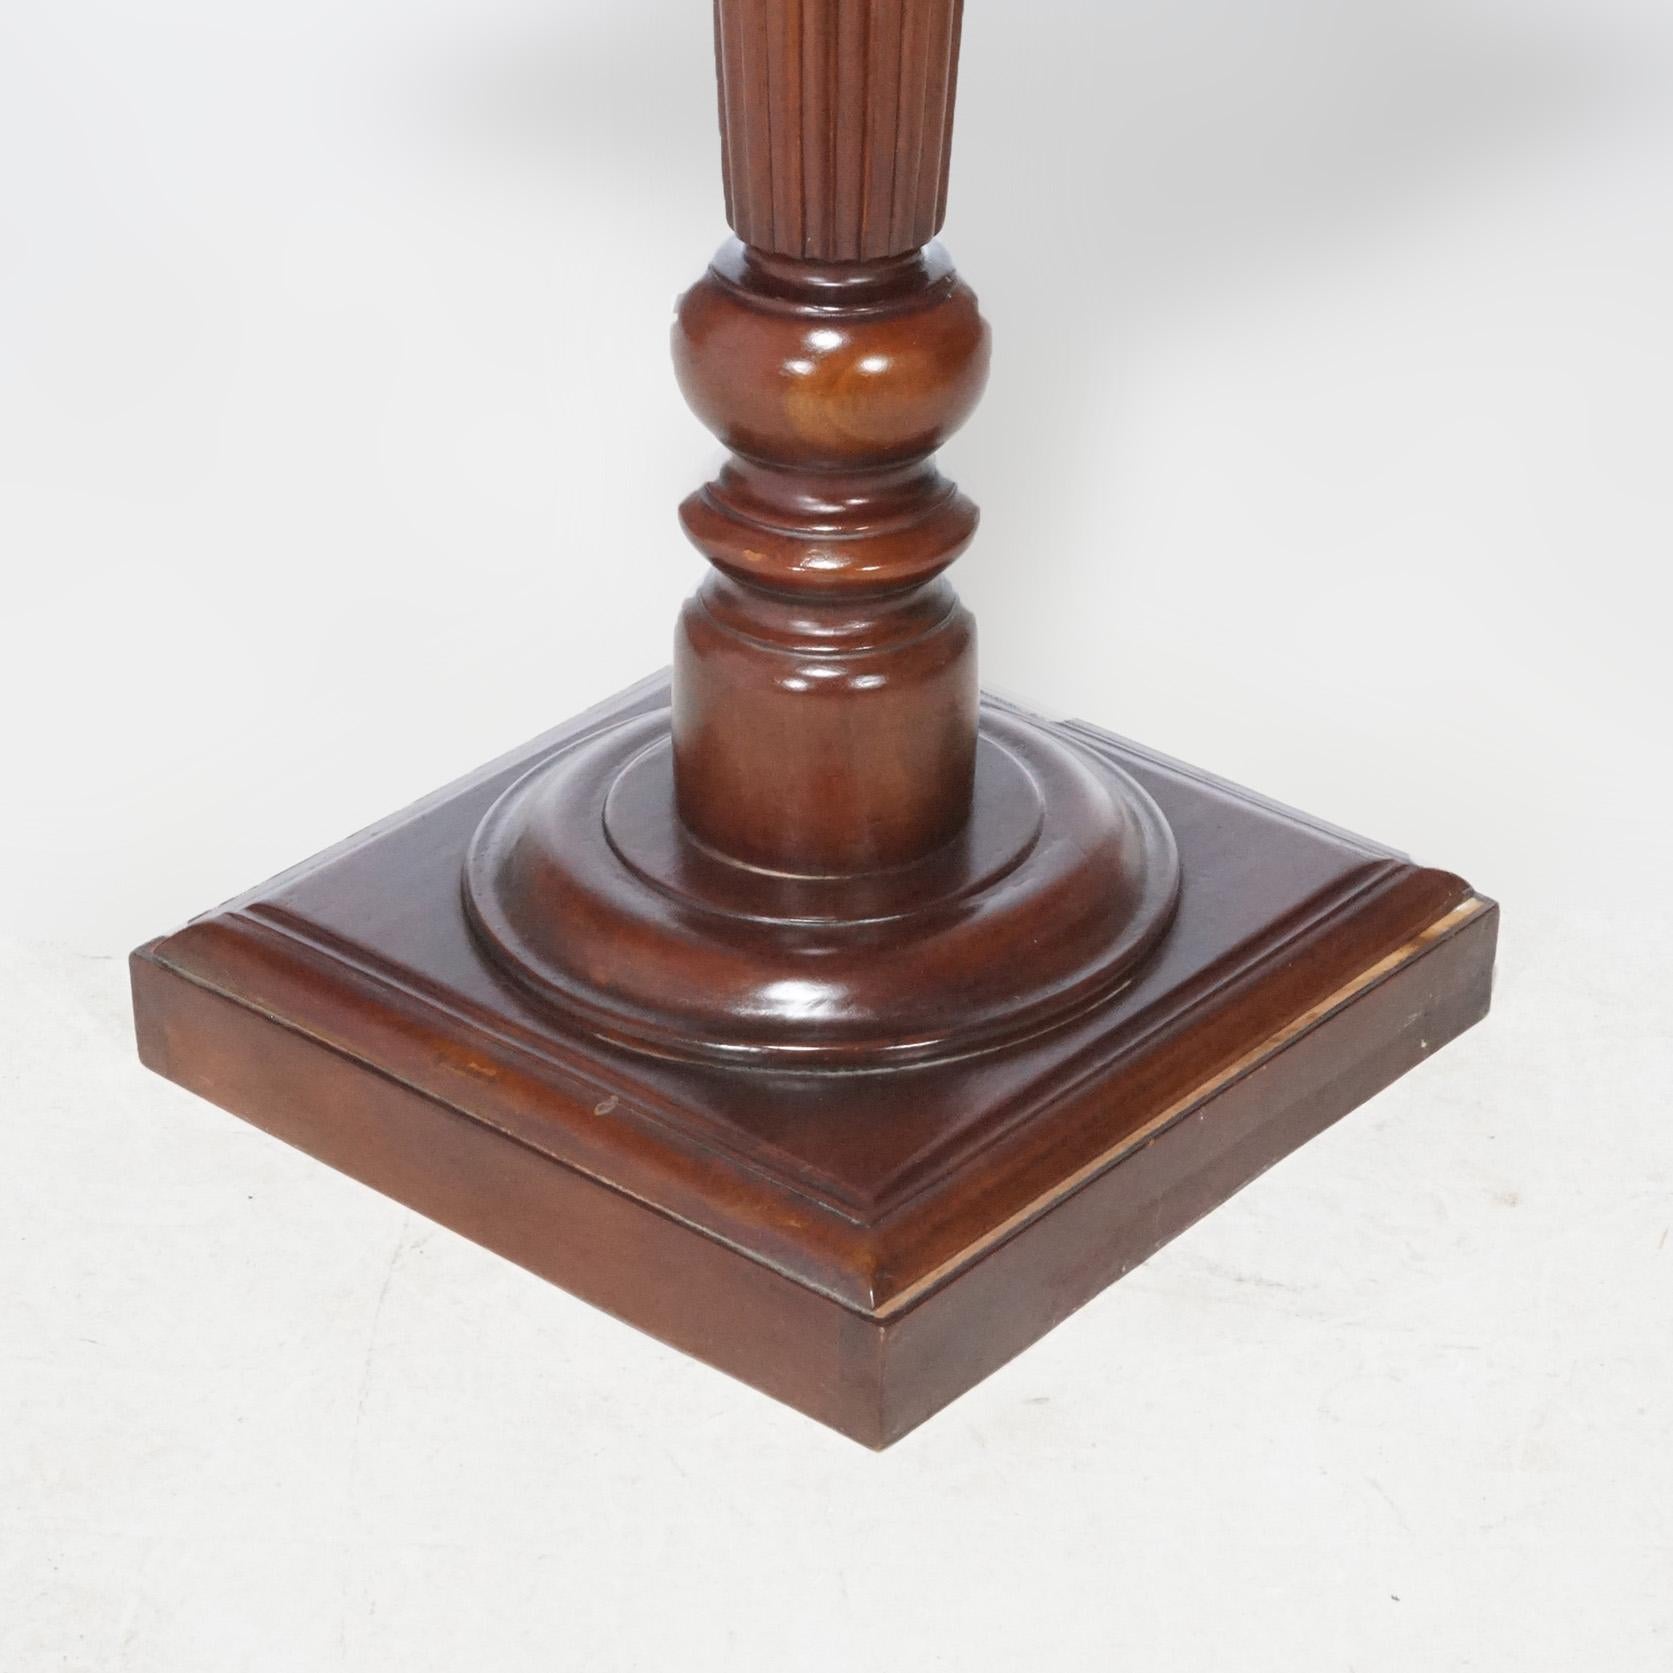 Antique Neoclassical Carved Mahogany Sculpture Display Pedestal, circa 1900 For Sale 5